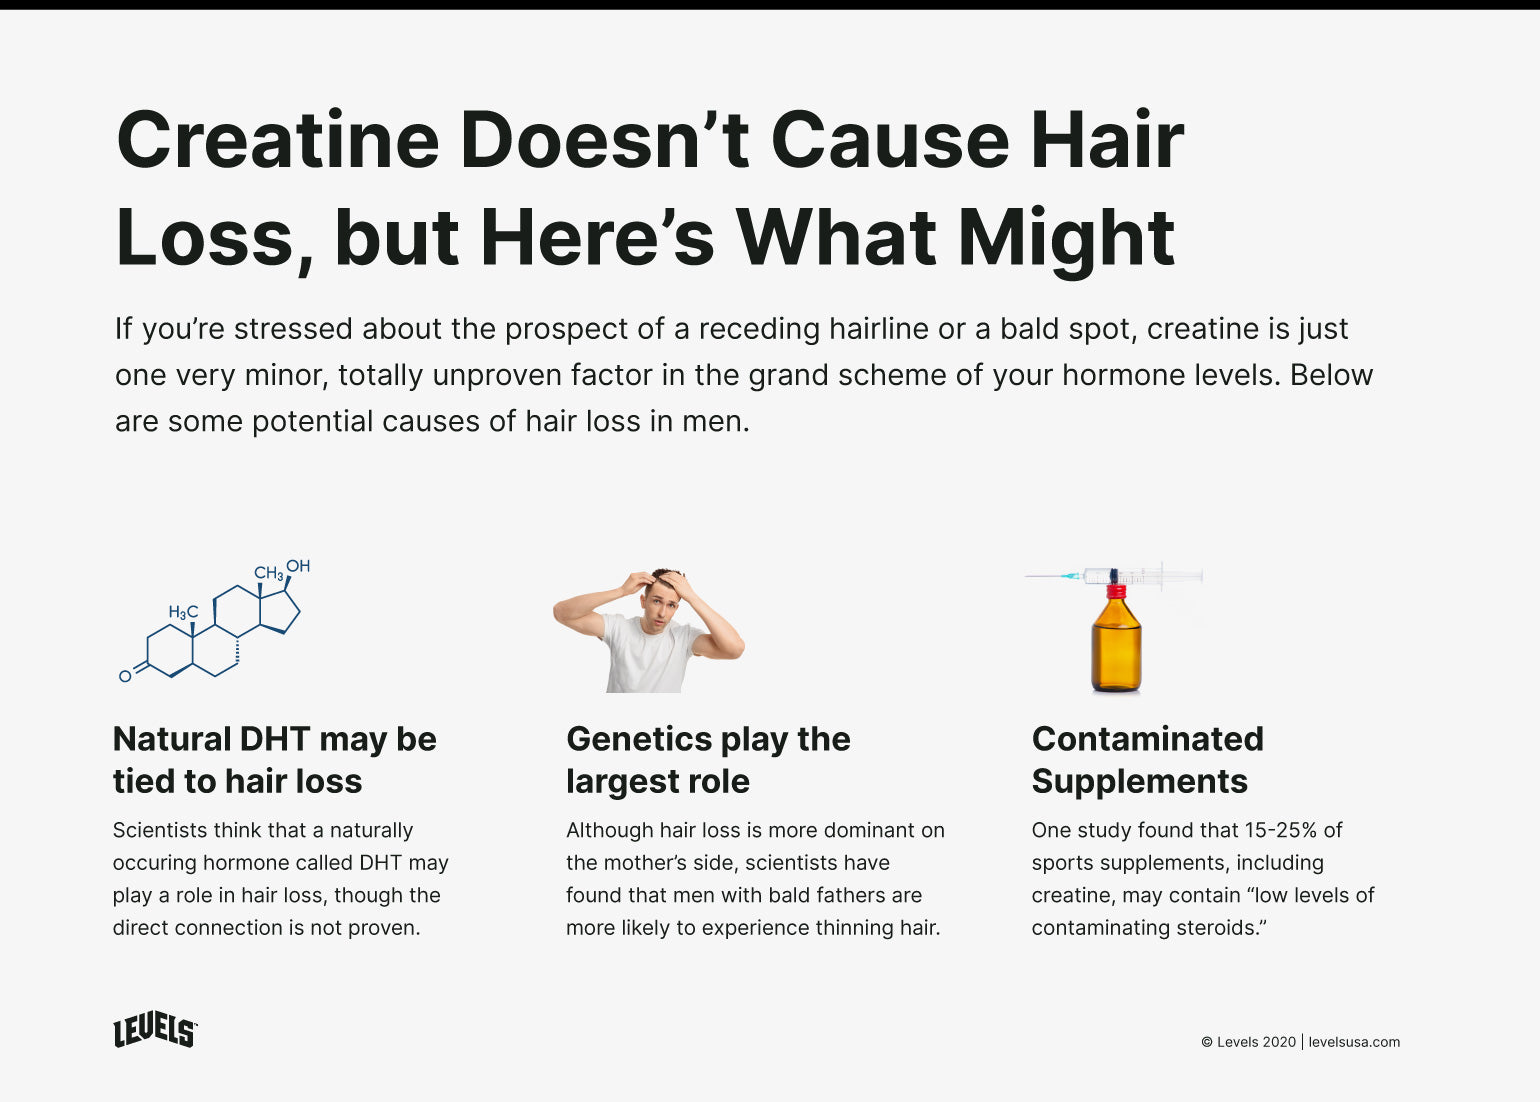 Creatine Causes Hair Loss: Myth or Fact? - Levels